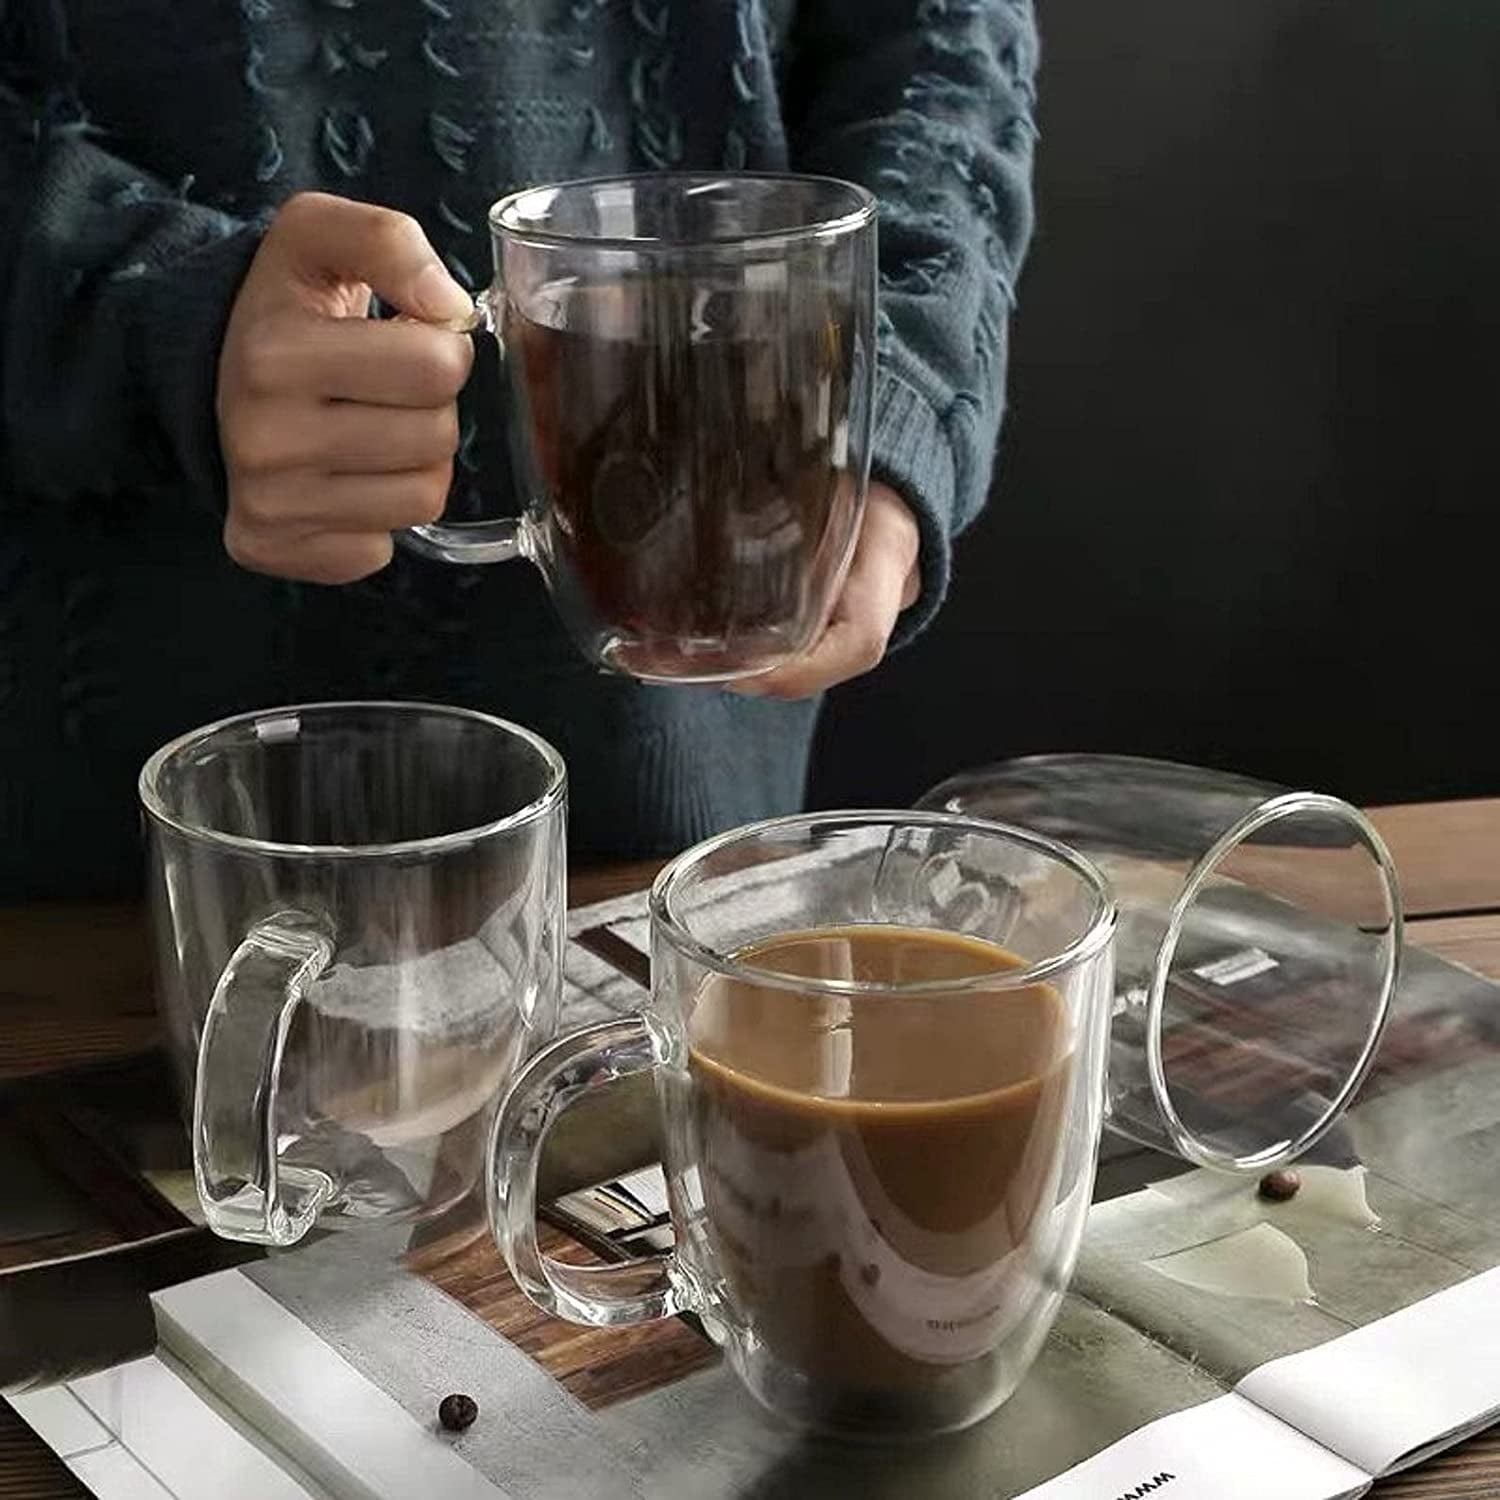 YUNCANG Double Wall Glass Coffee Mugs, (2-Pcak) 16 Ounces-Clear Glass  Coffee Cups with Handle,Insula…See more YUNCANG Double Wall Glass Coffee  Mugs